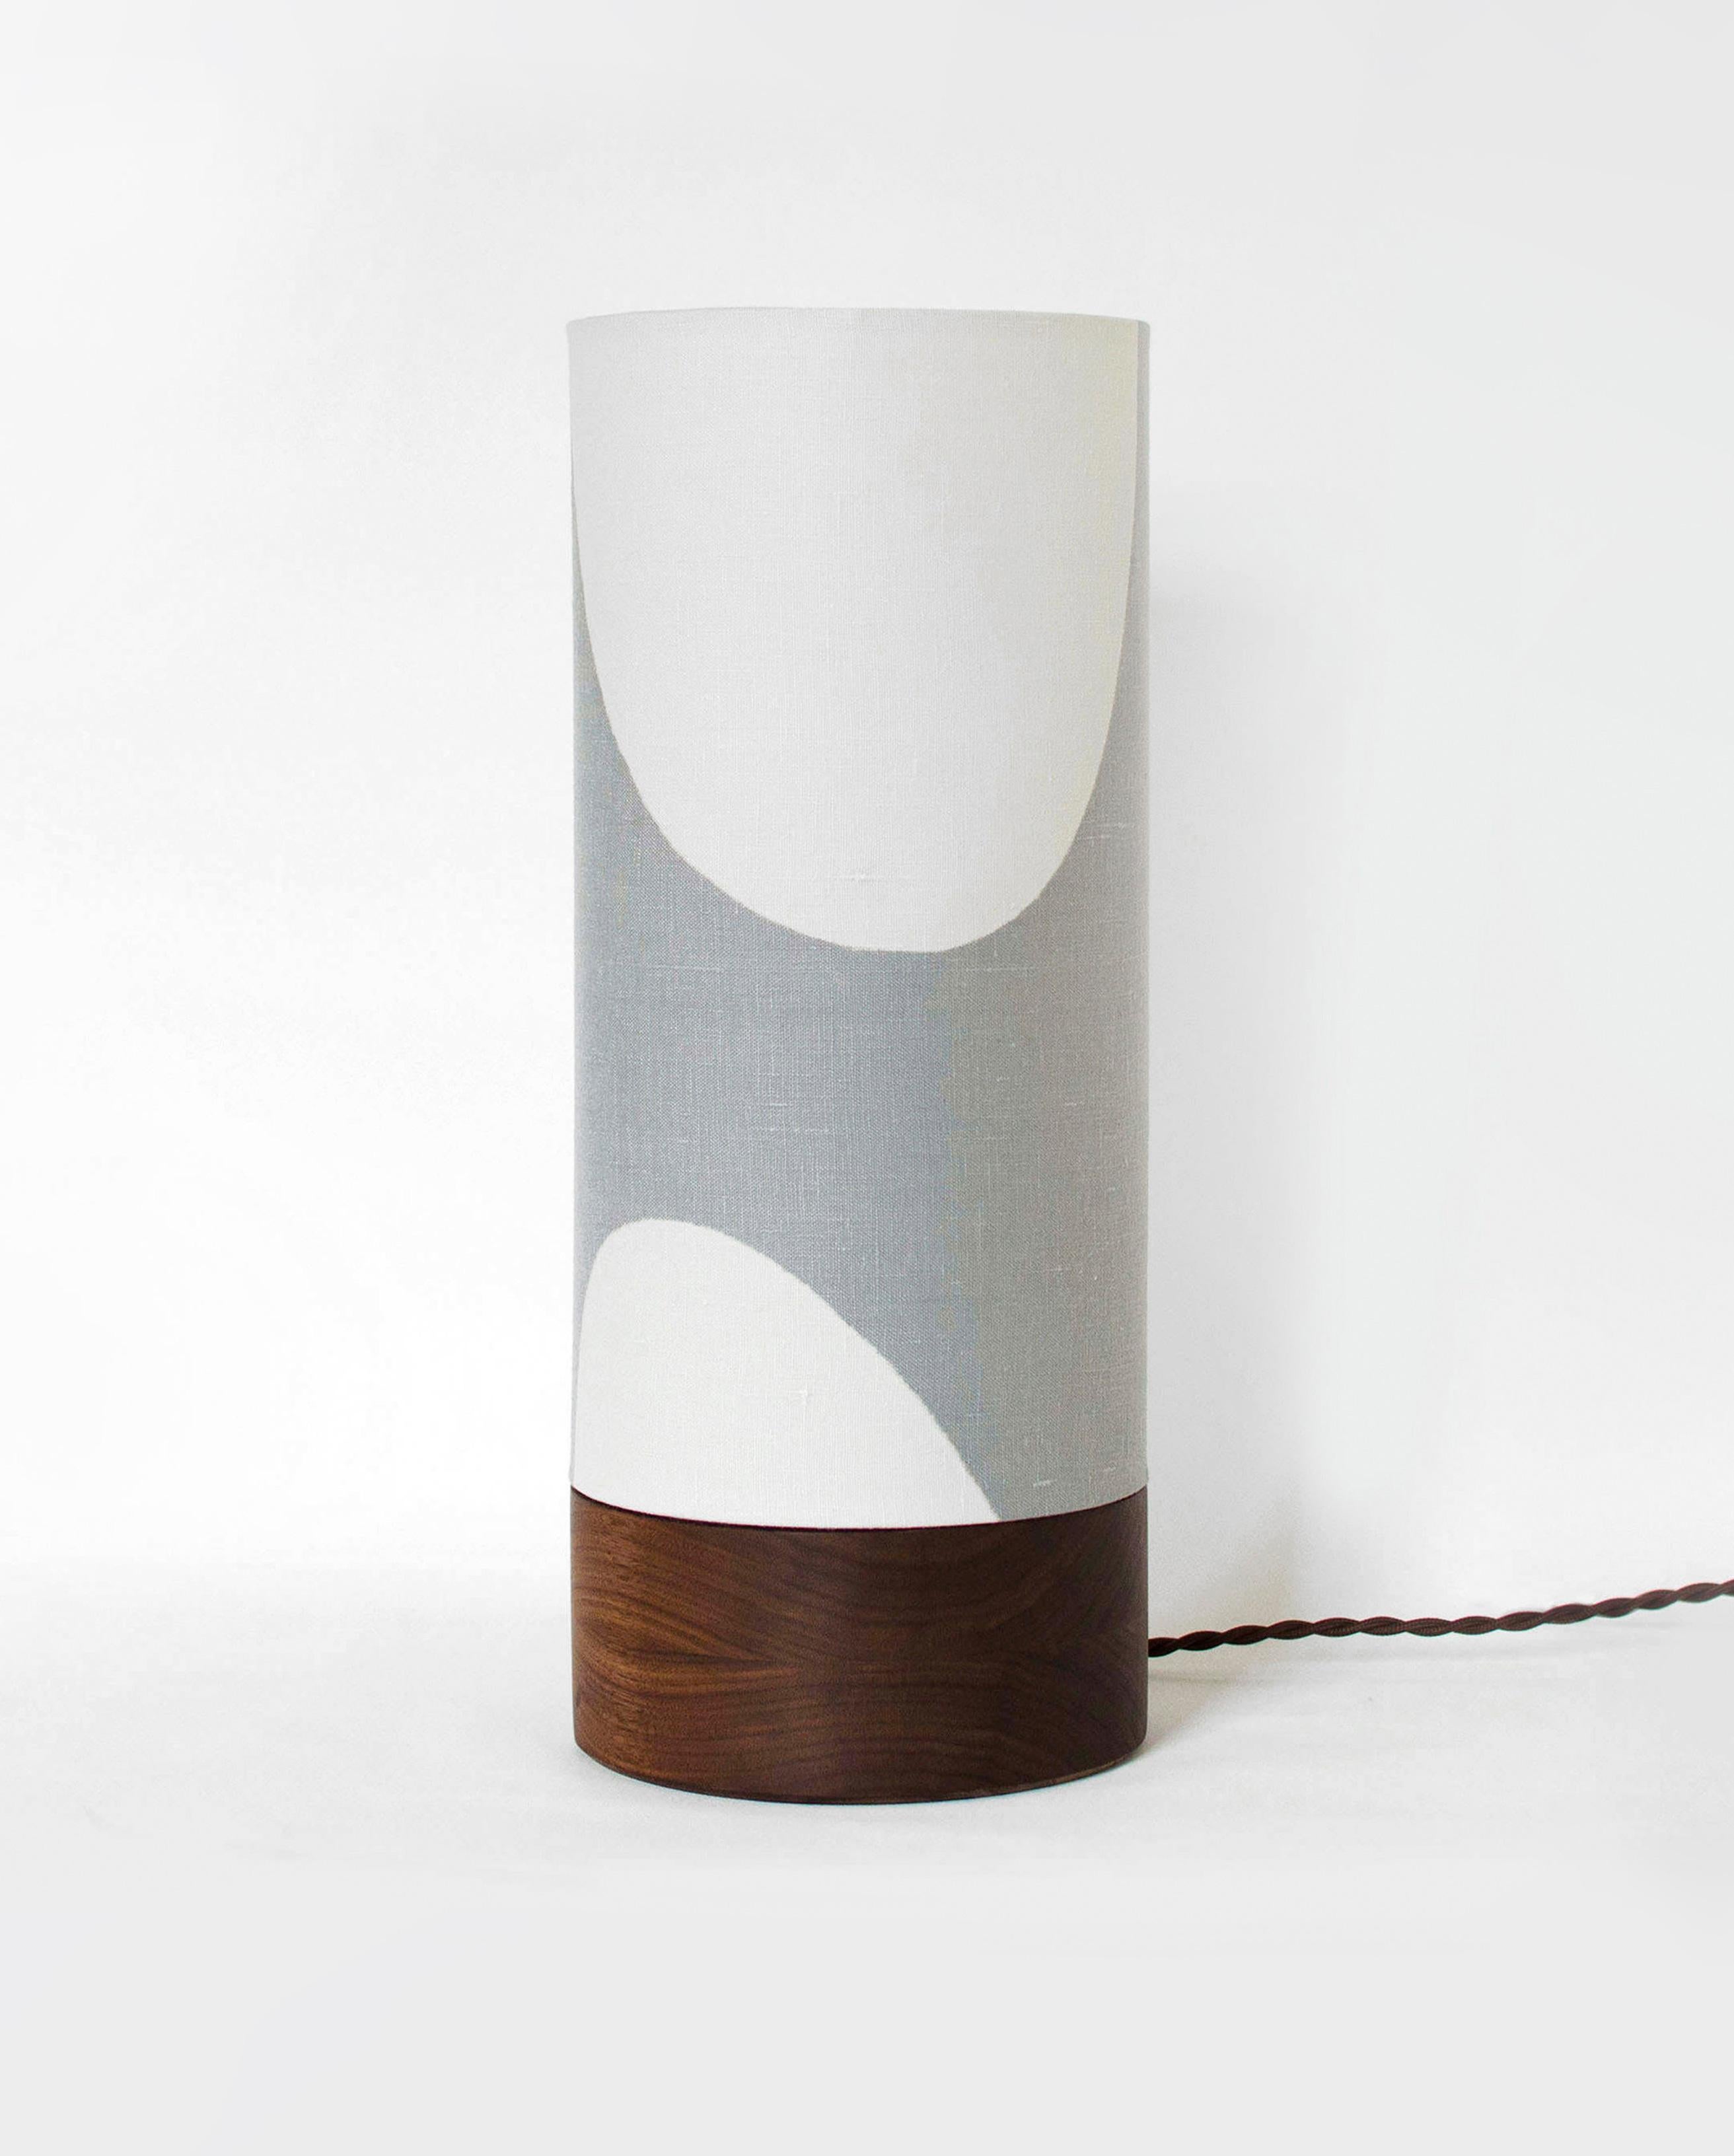 Exploring the balance between positive and negative spaces this table lamp evokes a Mid-Century aesthetic design with a contemporary look, bringing to any interior a handcrafted and unique piece. 

The lampshade is paired with a beautiful minimalist